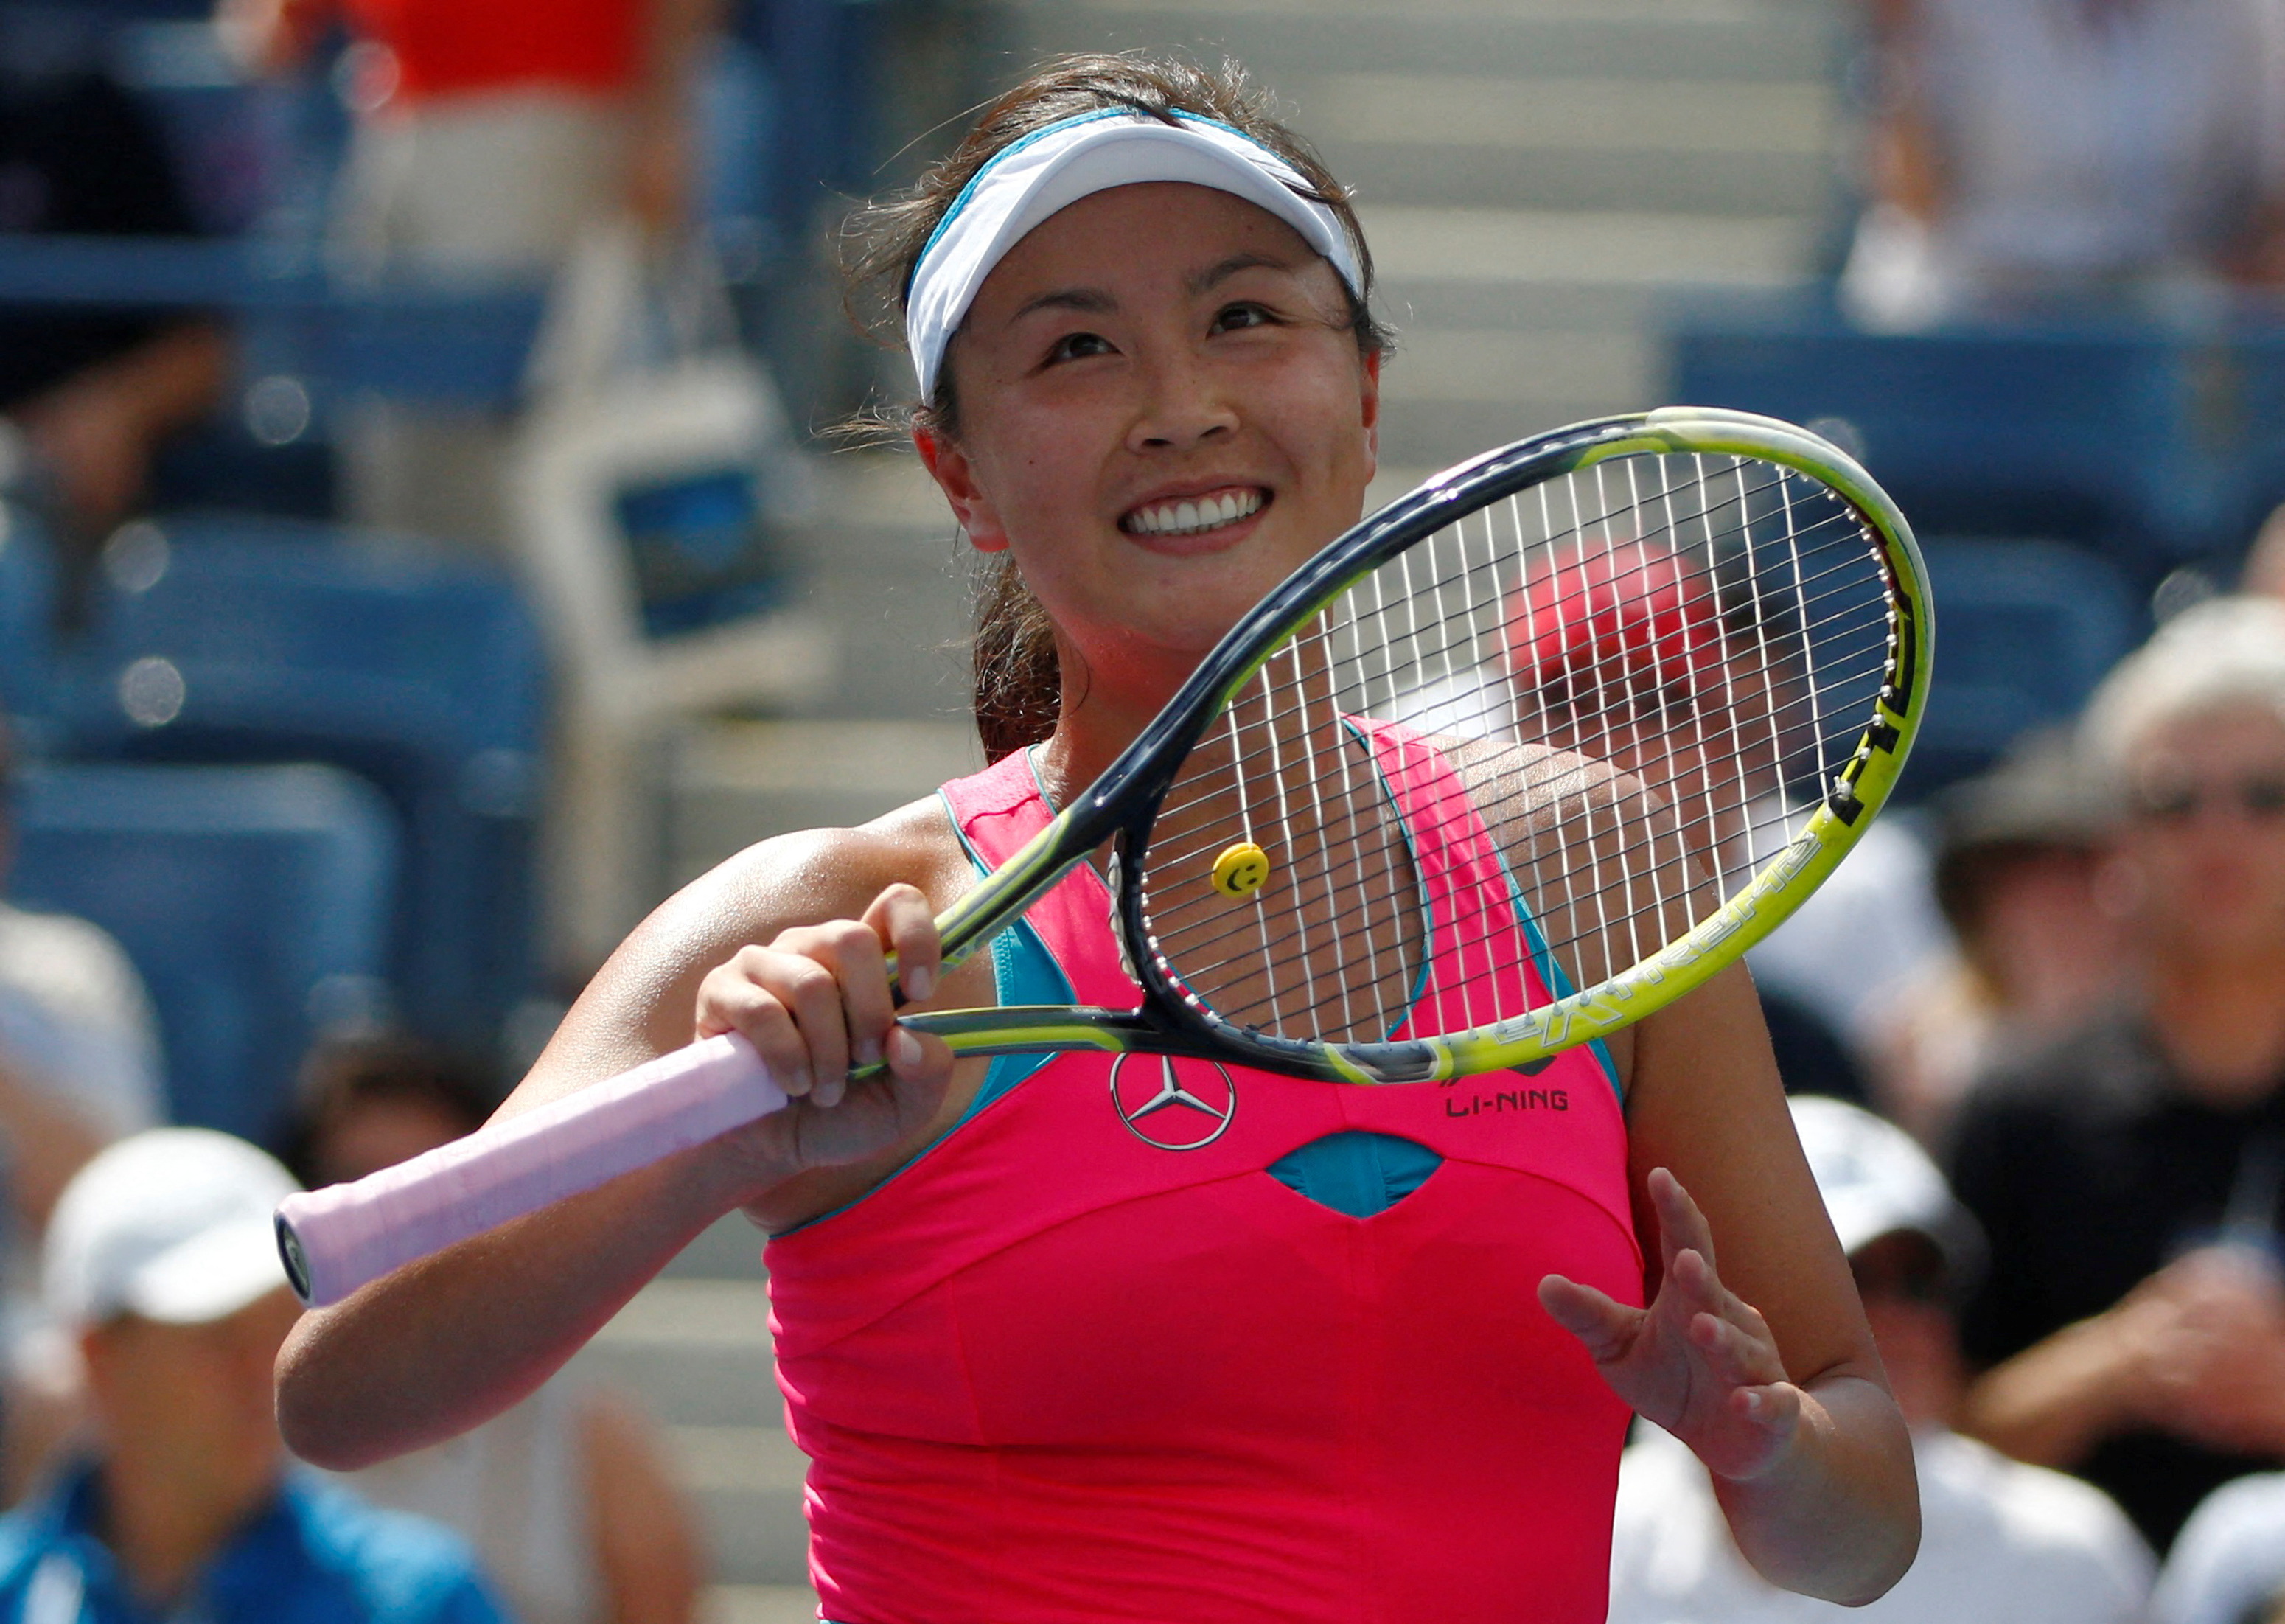 Peng Shuai of China reacts after her victory over Belinda Bencic of Switzerland in their quarterfinals match at the 2014 U.S. Open tennis tournament in New York